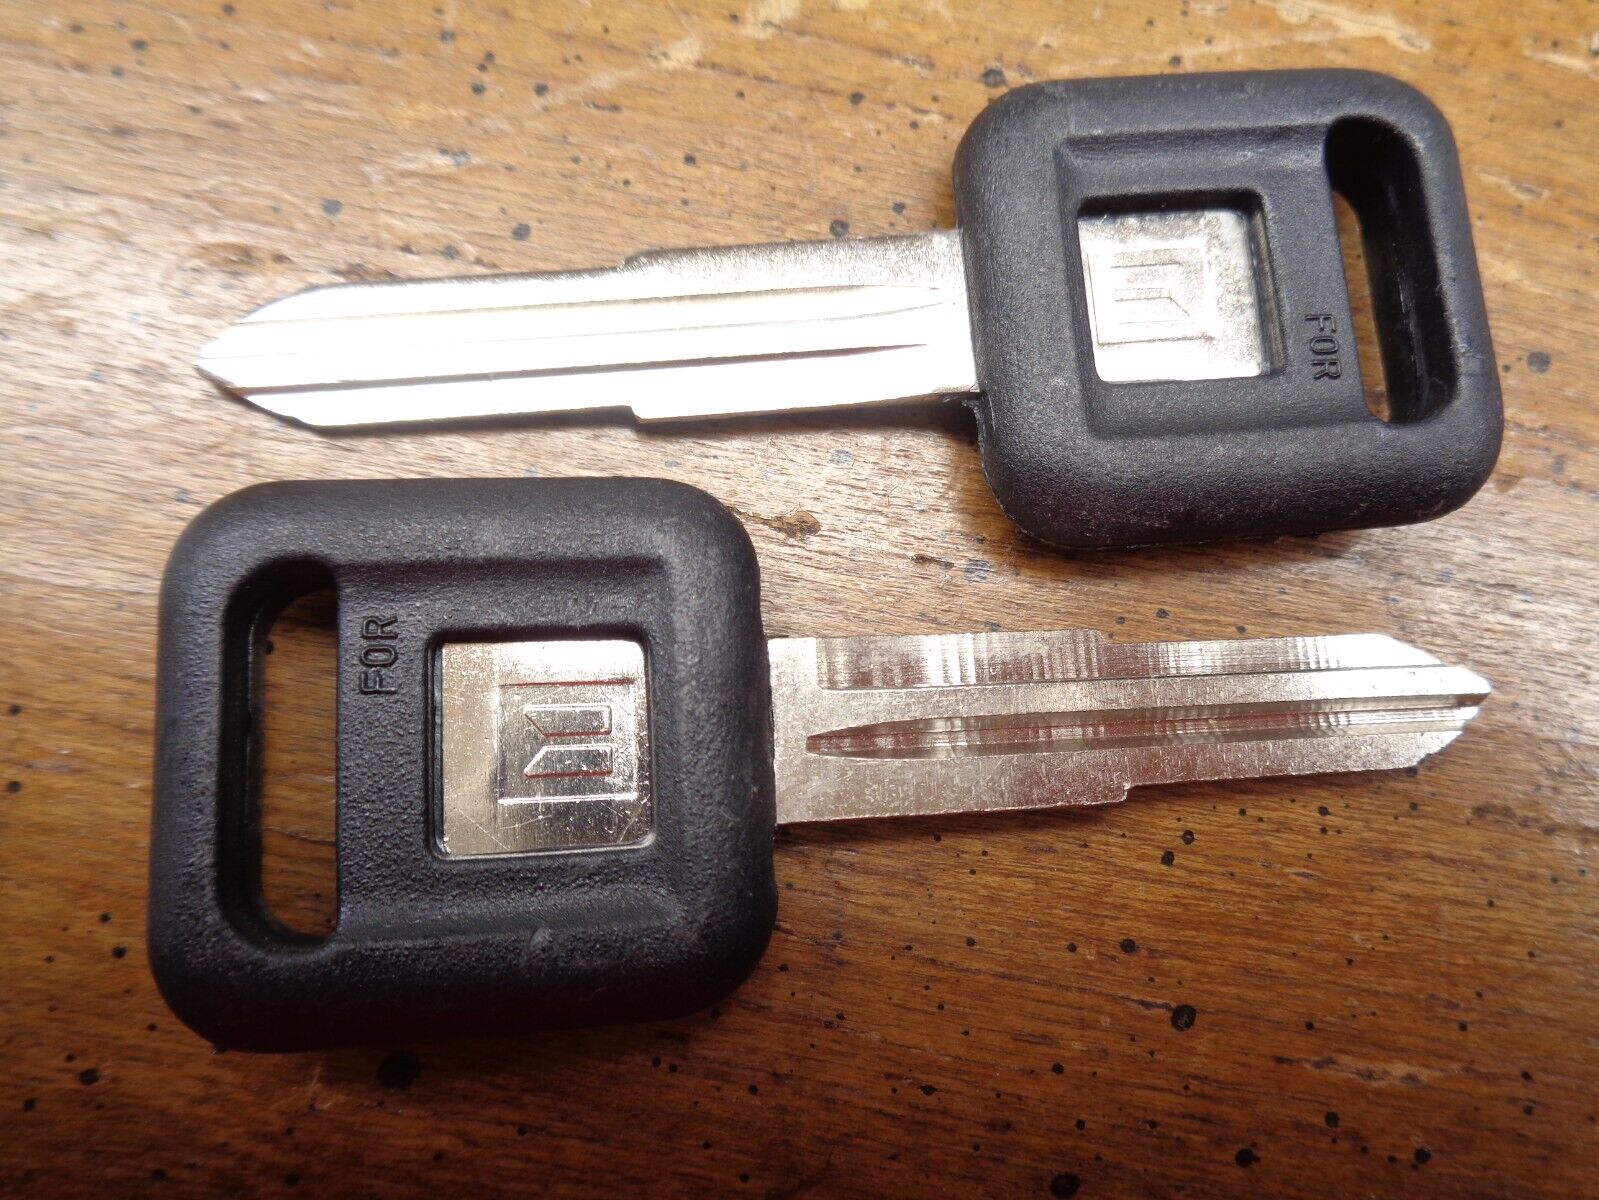 ISUZU BLANK KEY SPARE PACKAGE OF TWO NEW